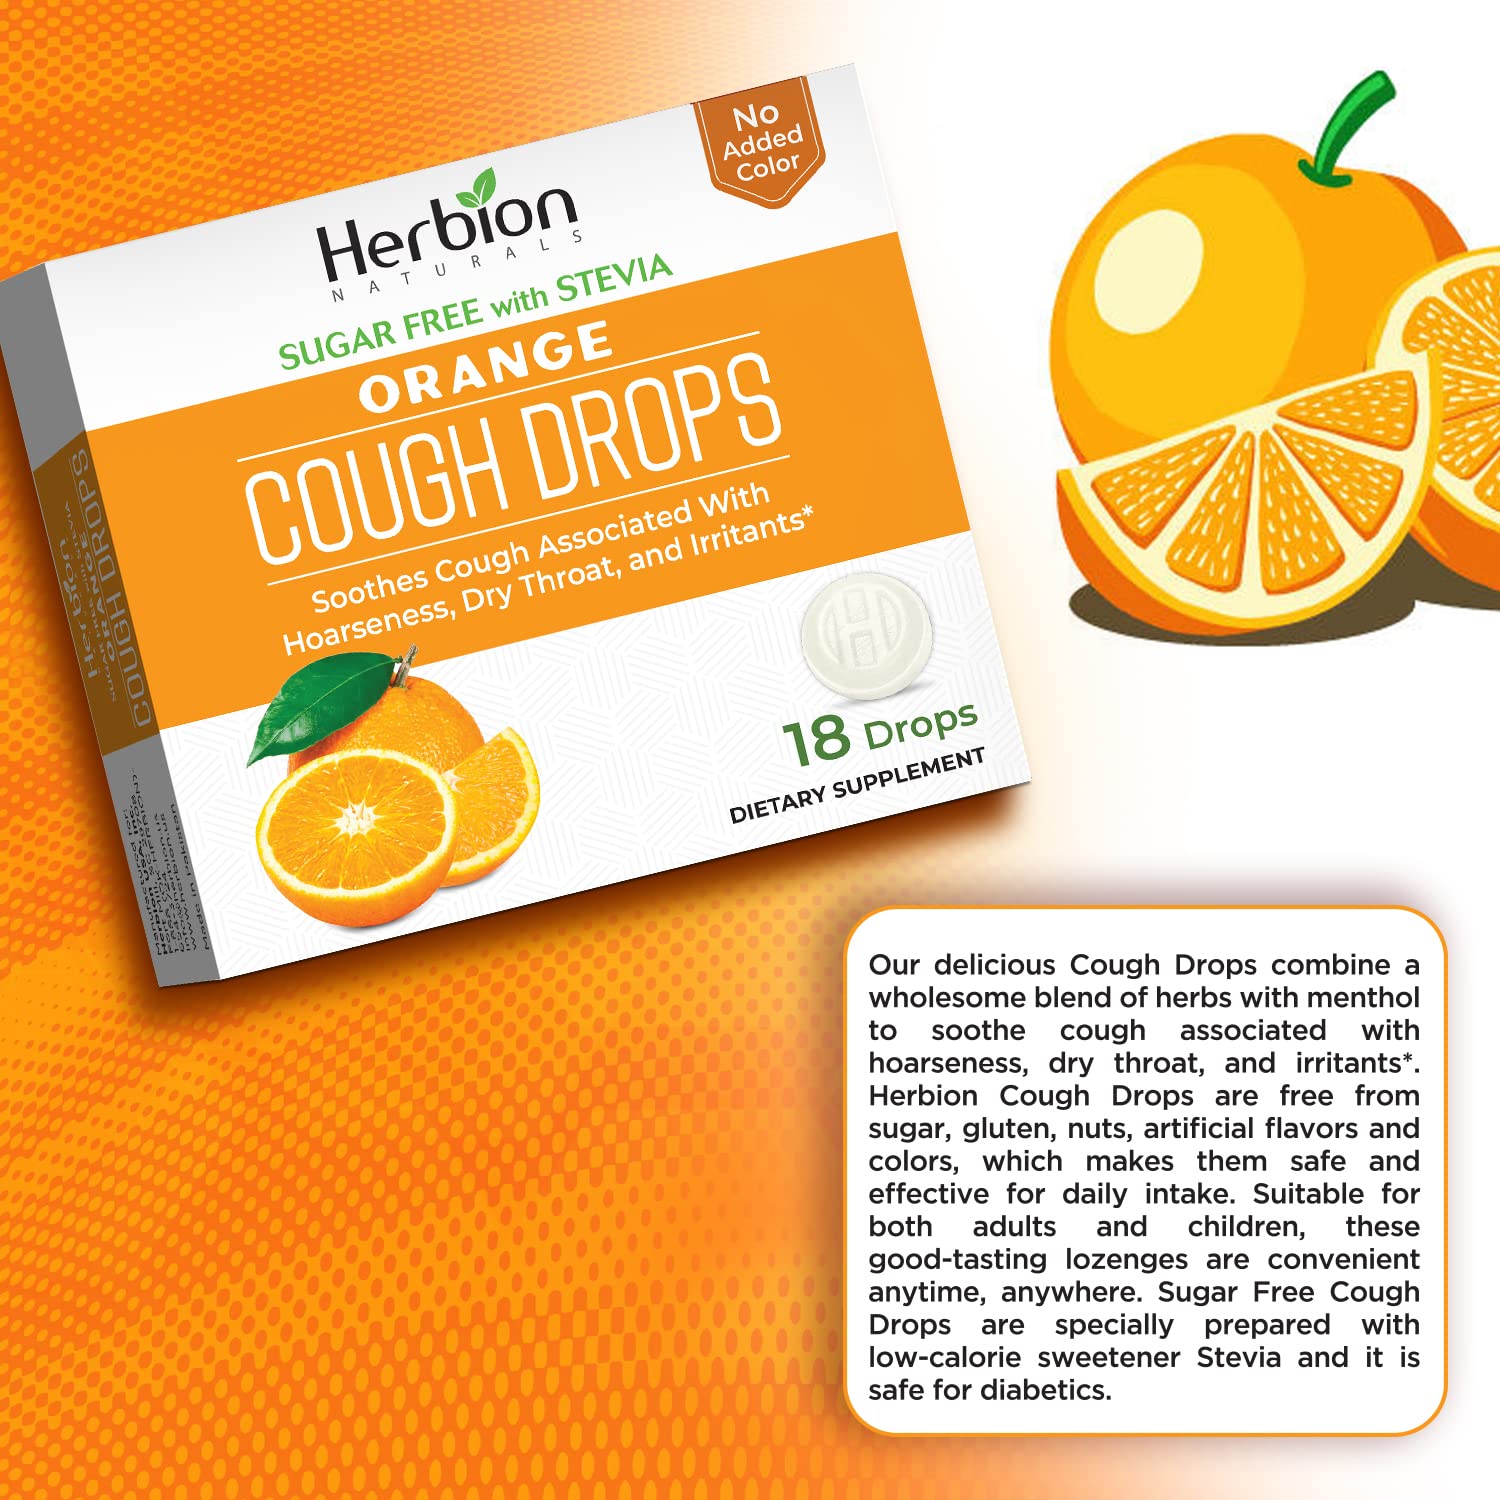 Herbion Naturals Sugar Free Cough Drops with Natural Orange Flavor, Natural Orange, (Pack of 3), 18 Count